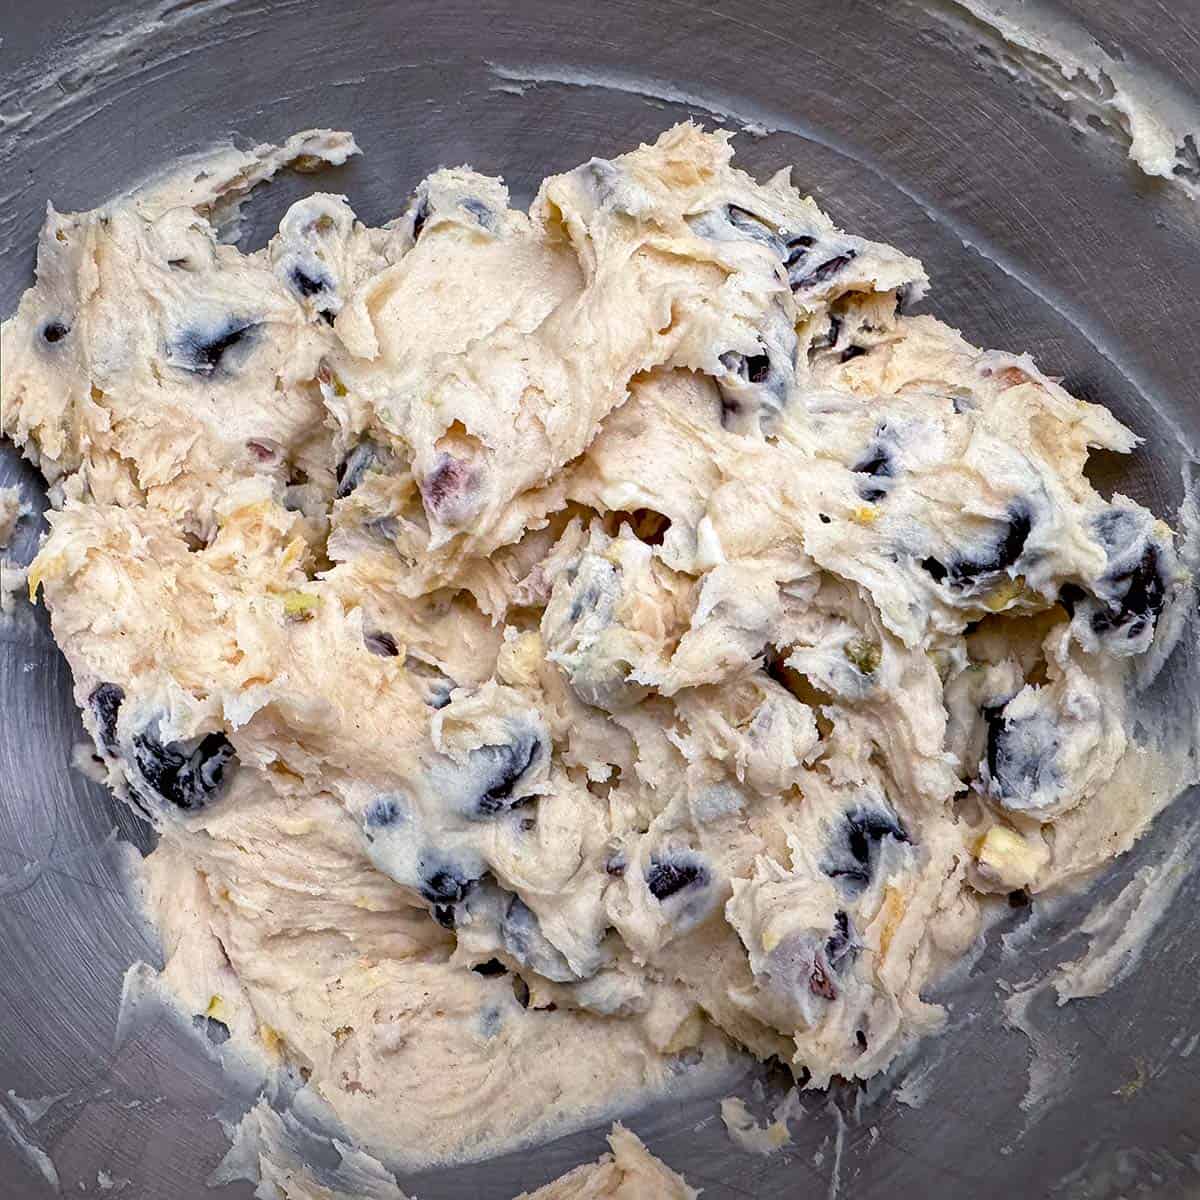 Everything is added to the cookie dough and ready for the refrigerator to chill.